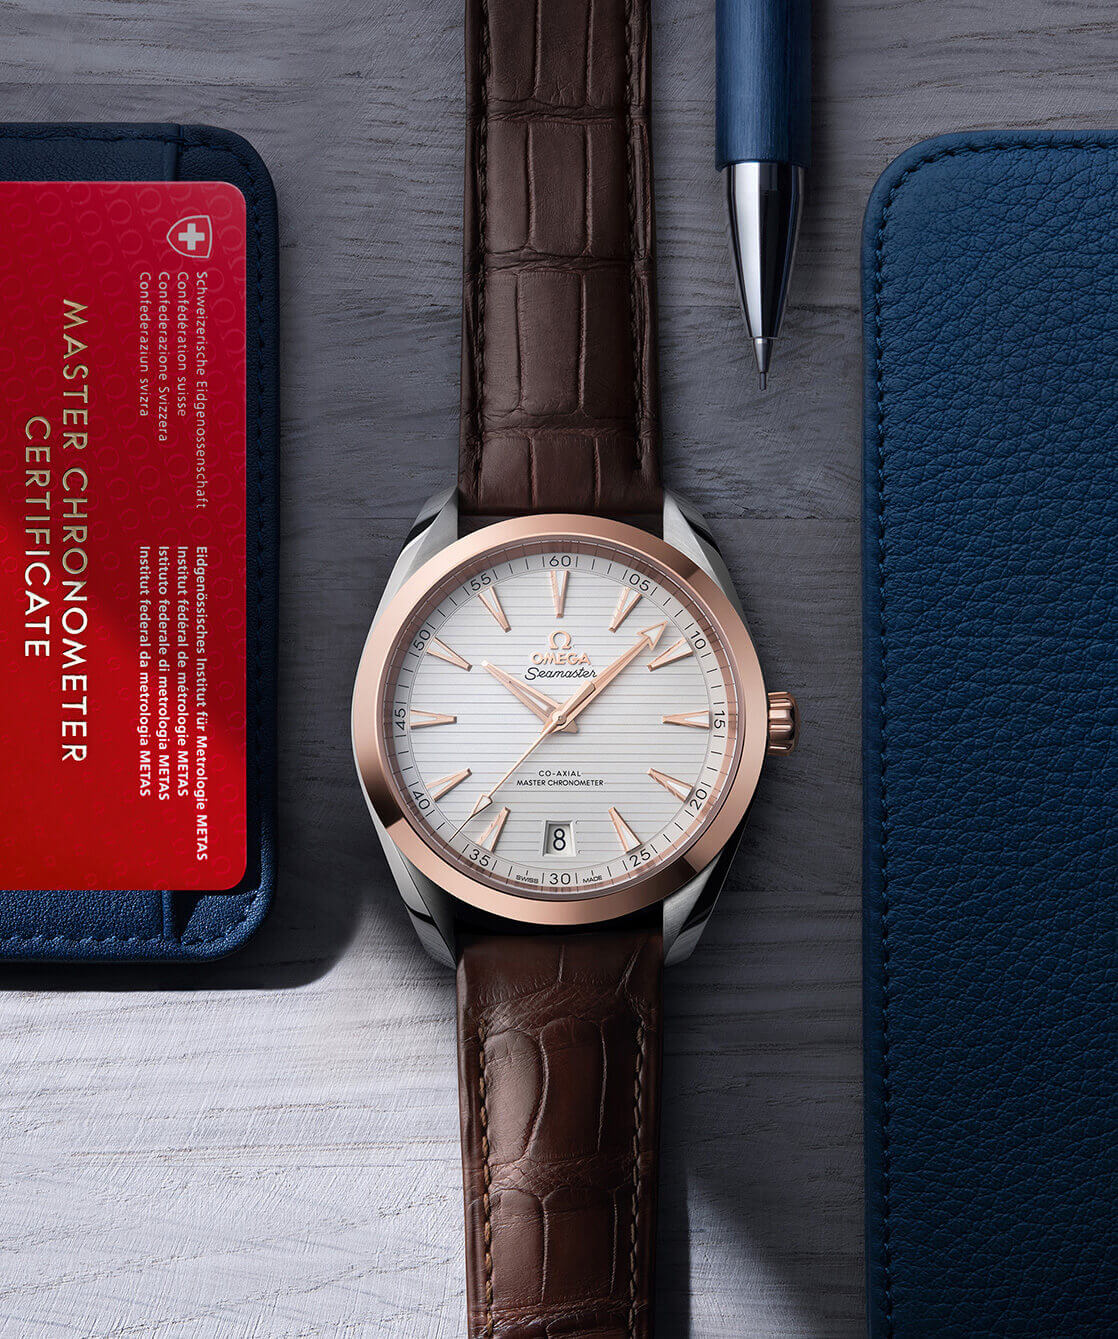 Omega's latest collection of watches is here | GQ India